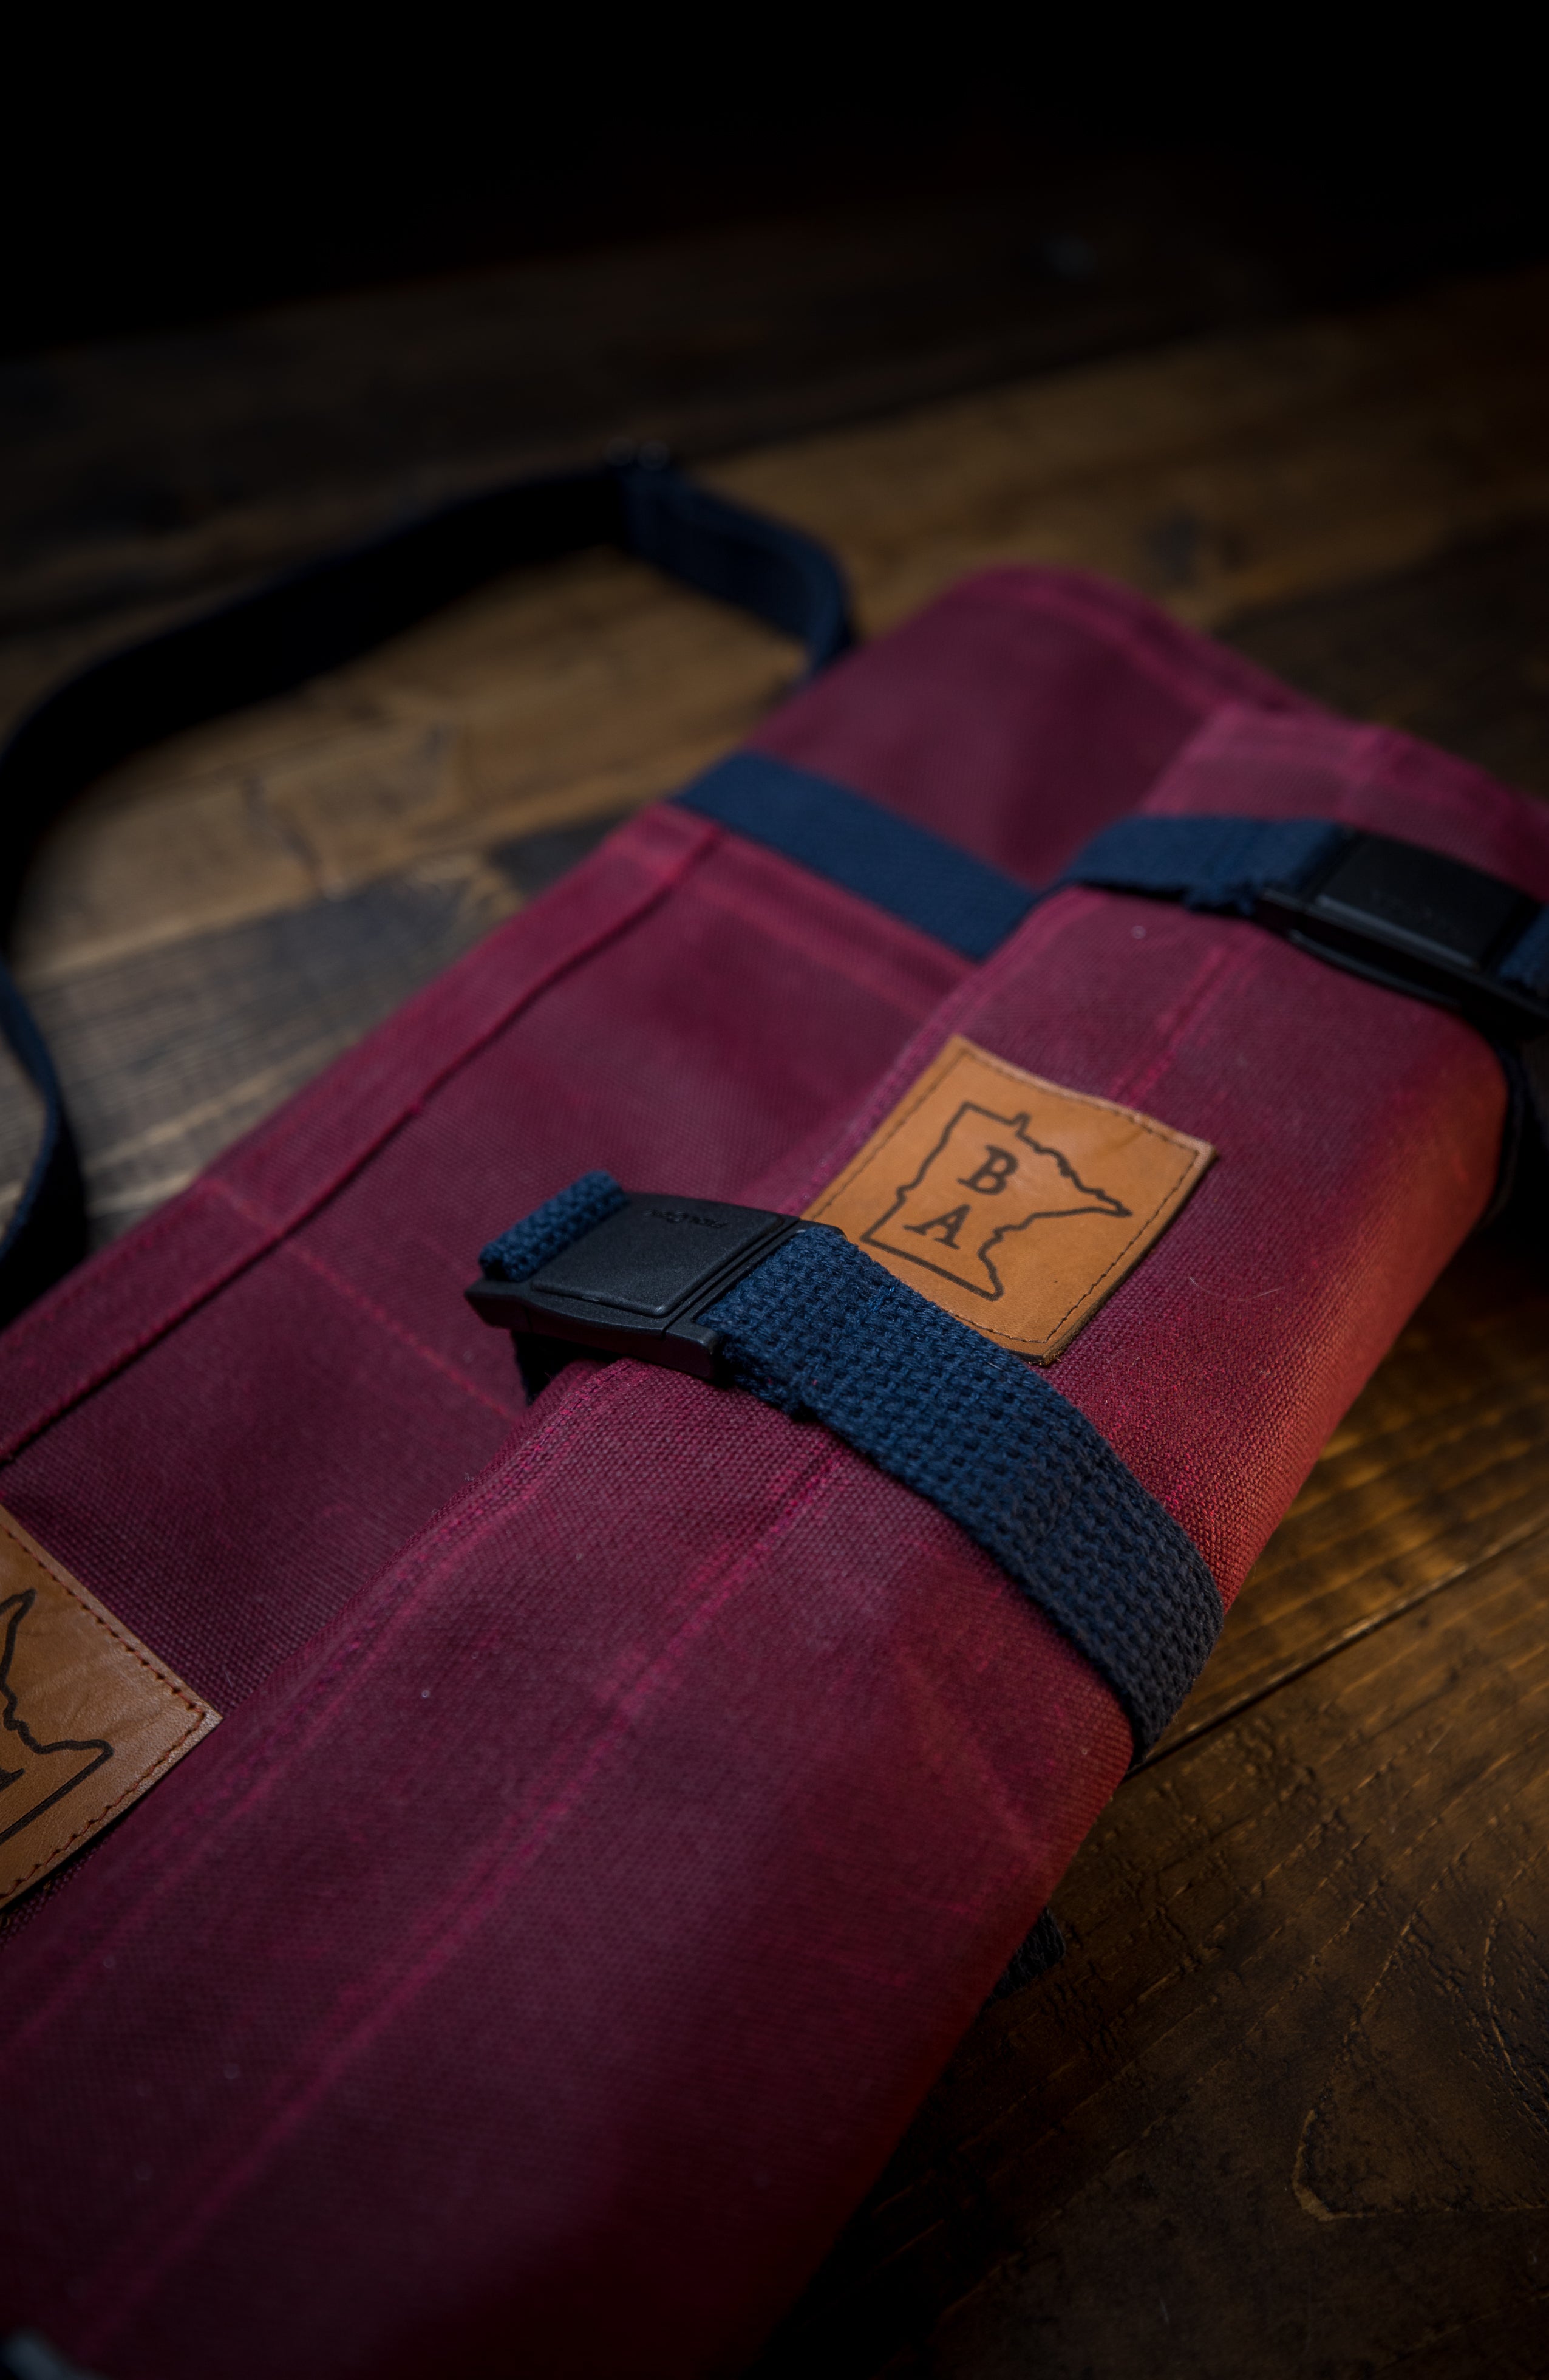     Product shot of the burgundy Side Hustle roll on a wooden surface. The cotton water repellent and flame resistant knife roll was designed by Craftmade Aprons, Minnesota.